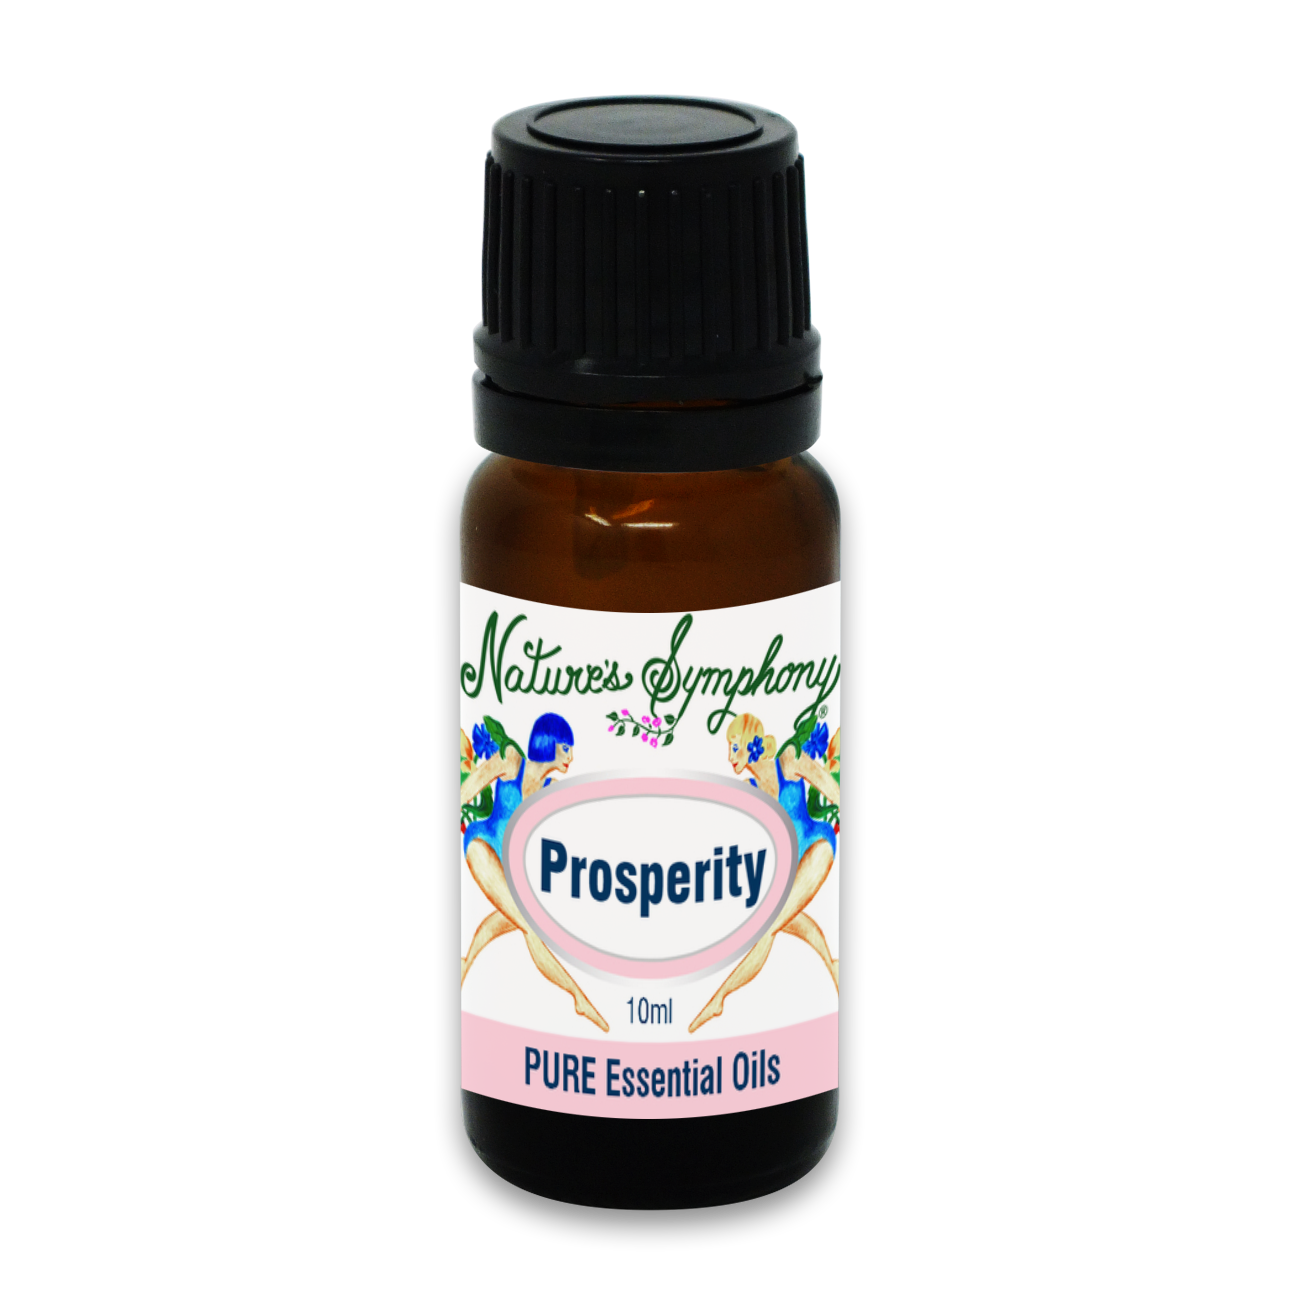 Prosperity, Ambiance Diffusion blend - 10ml